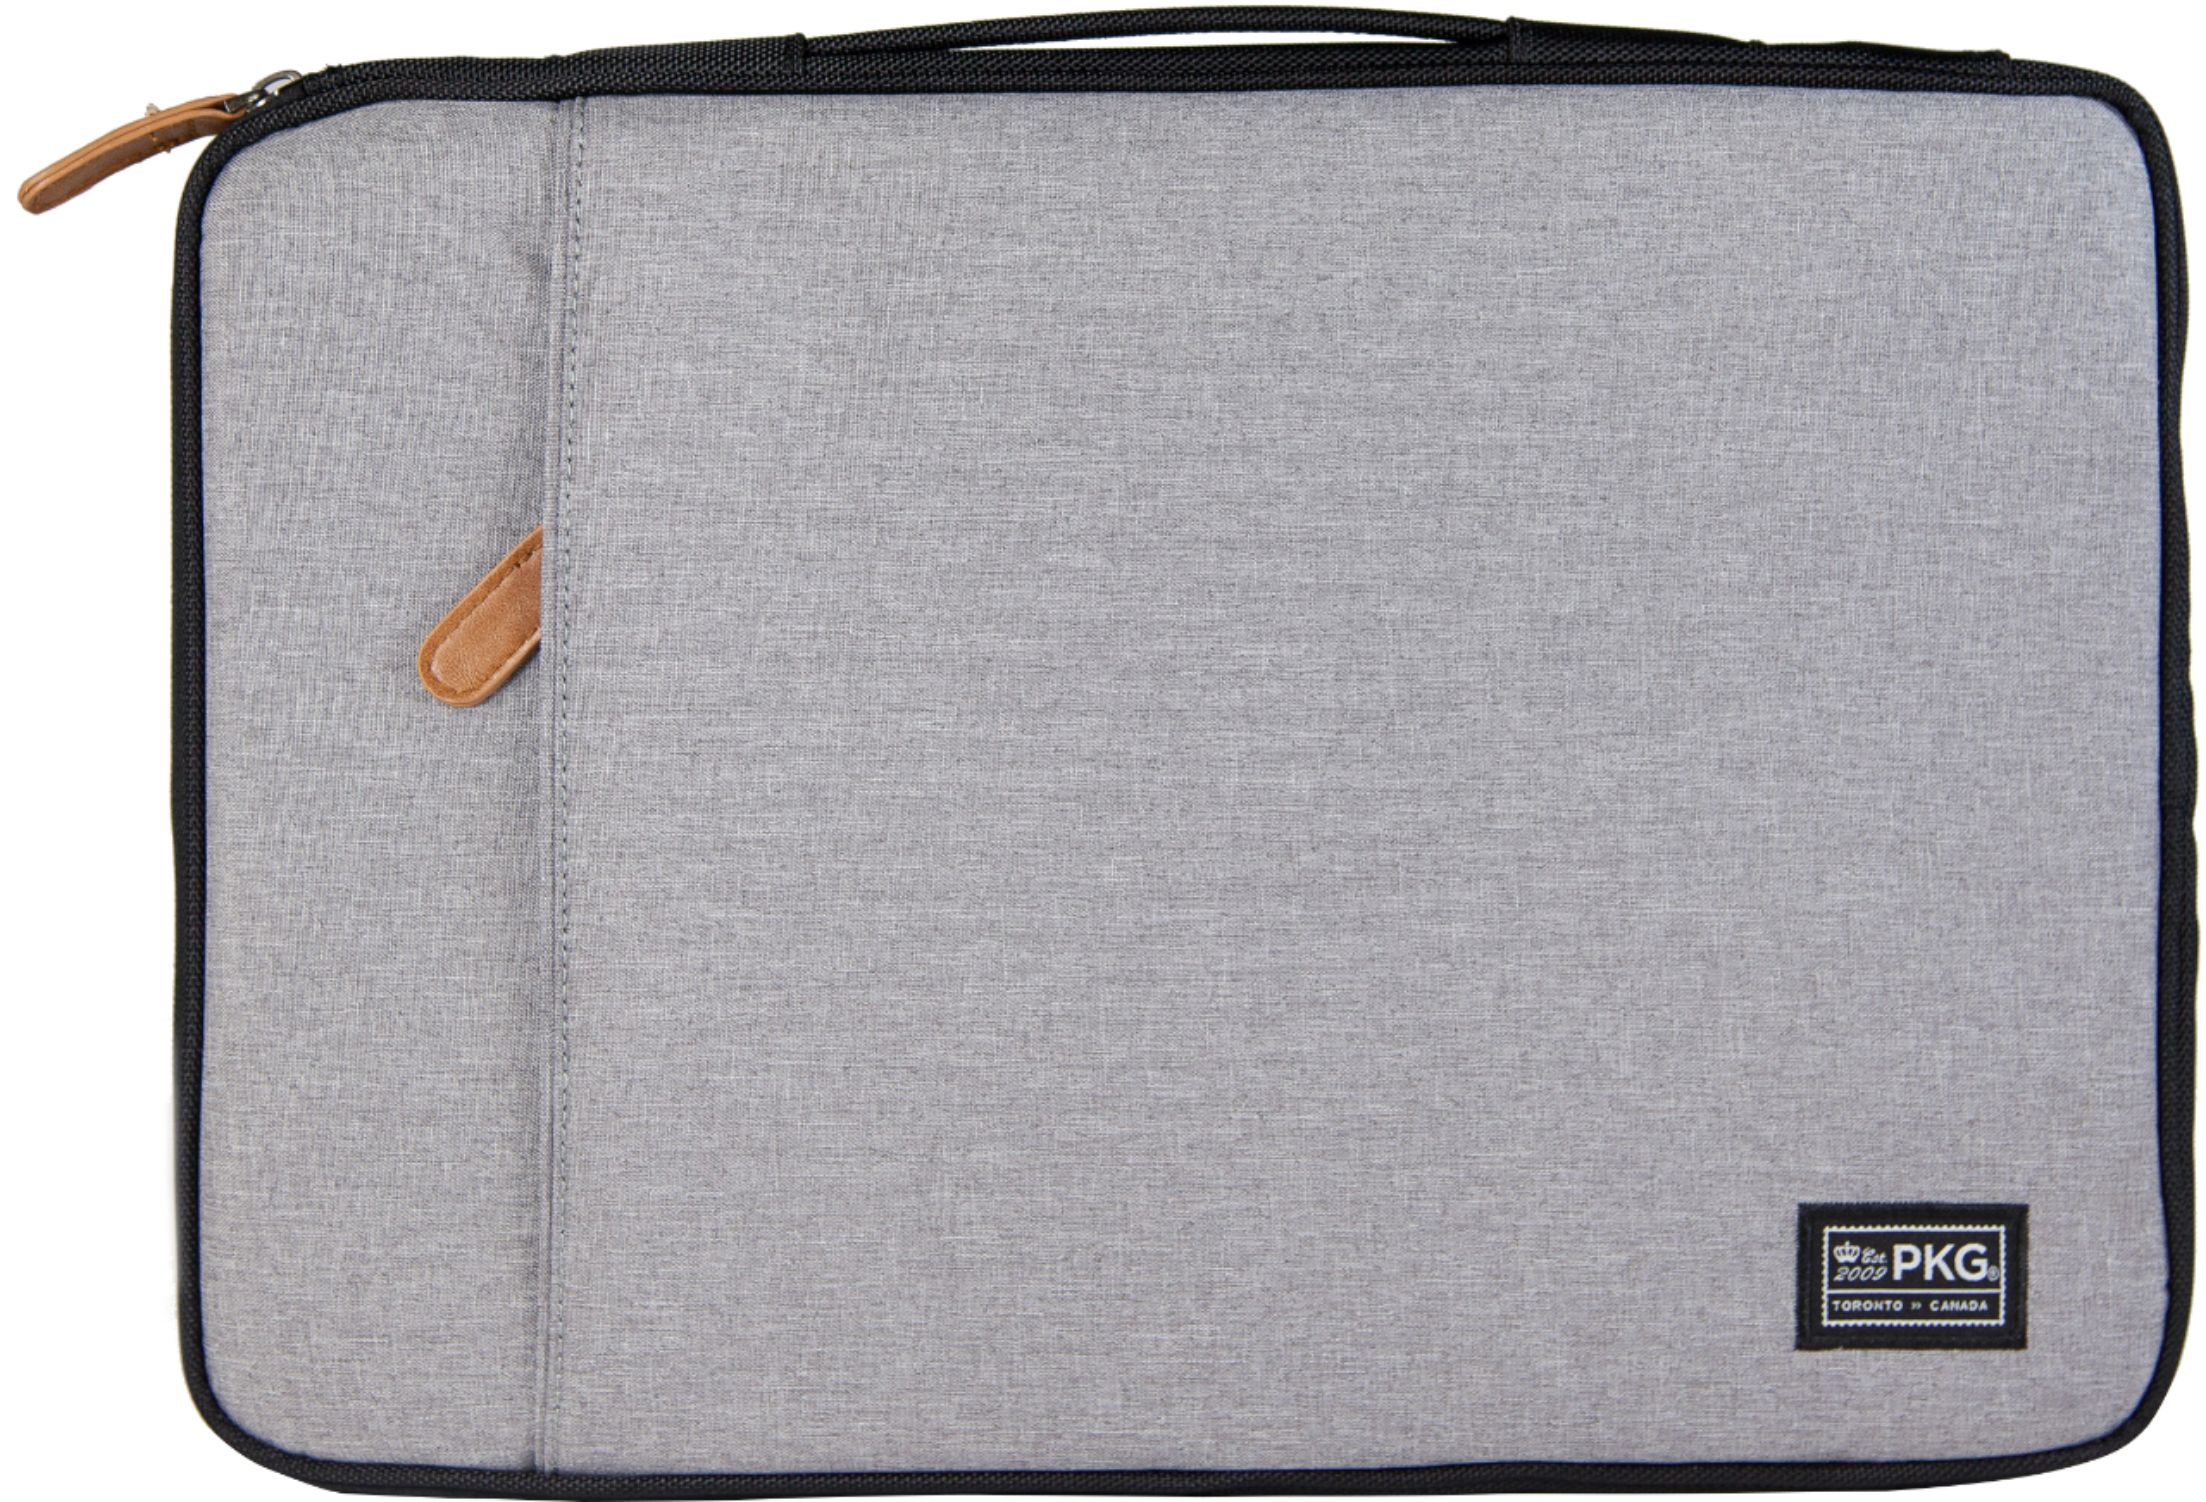 Back View: HP - Laptop Sleeve for 15.6" Laptop - Charcoal gray